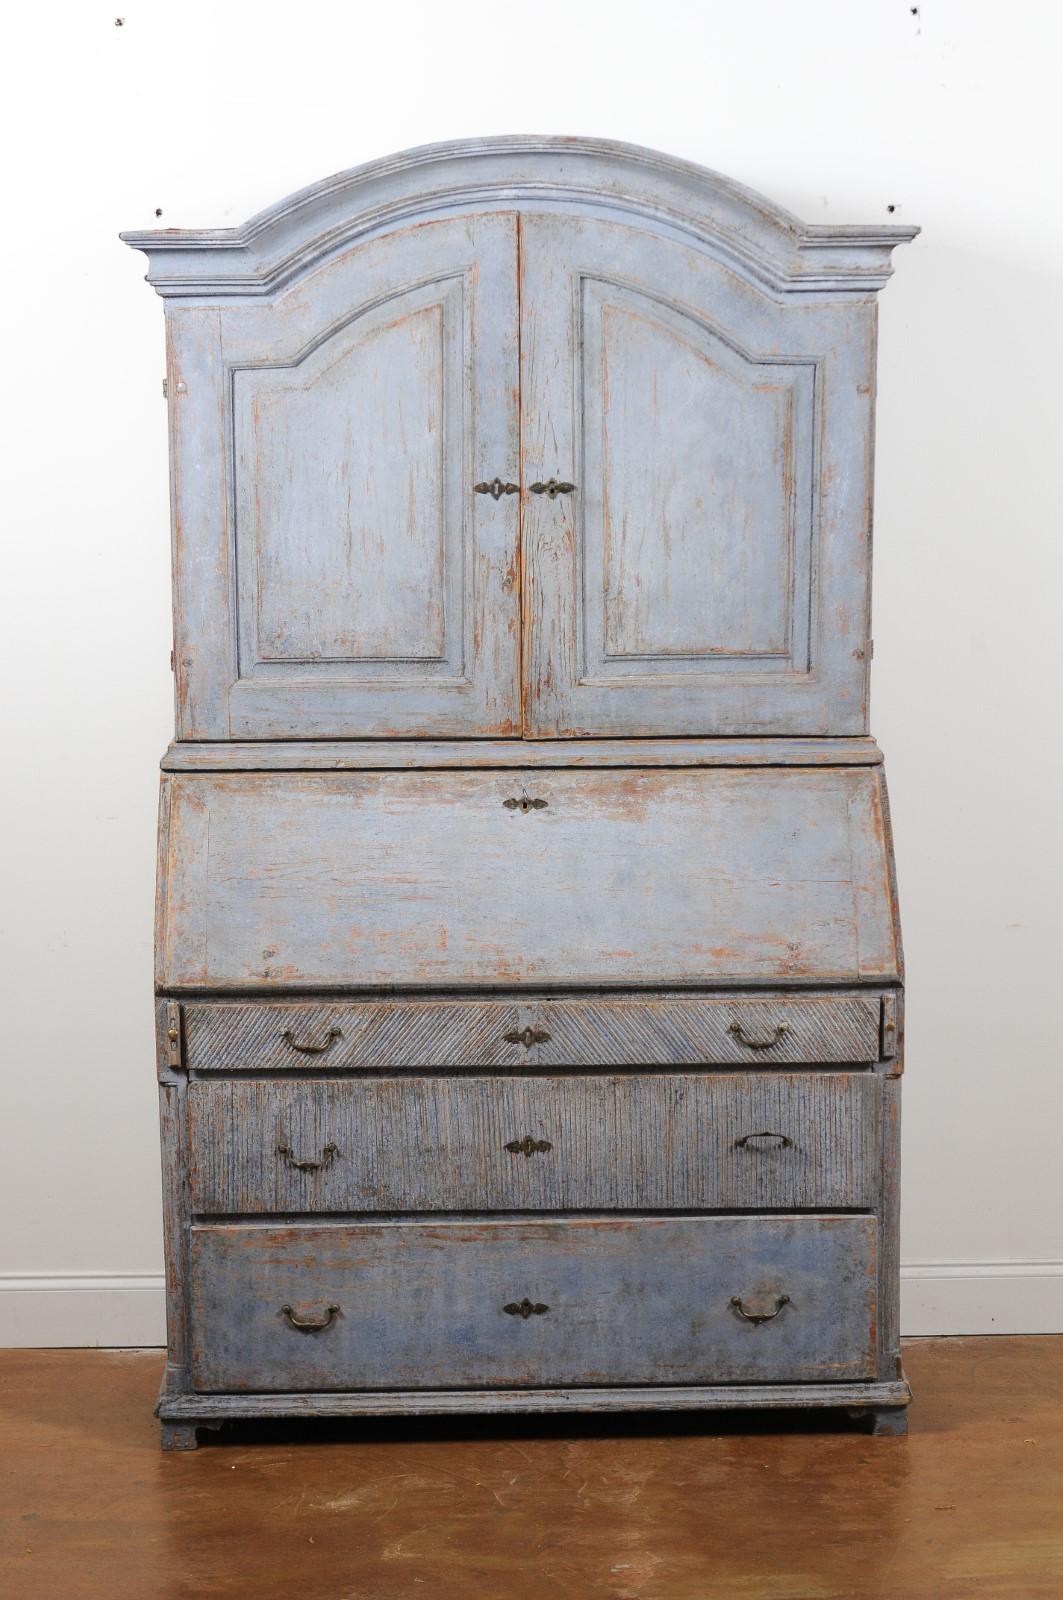 A Swedish late Gustavian two-part painted secretaire from the early 19th century, with bonnet top, slant front desk and chest of drawers. Created in Sweden during the early years of the 19th century, this tall painted secretaire features a